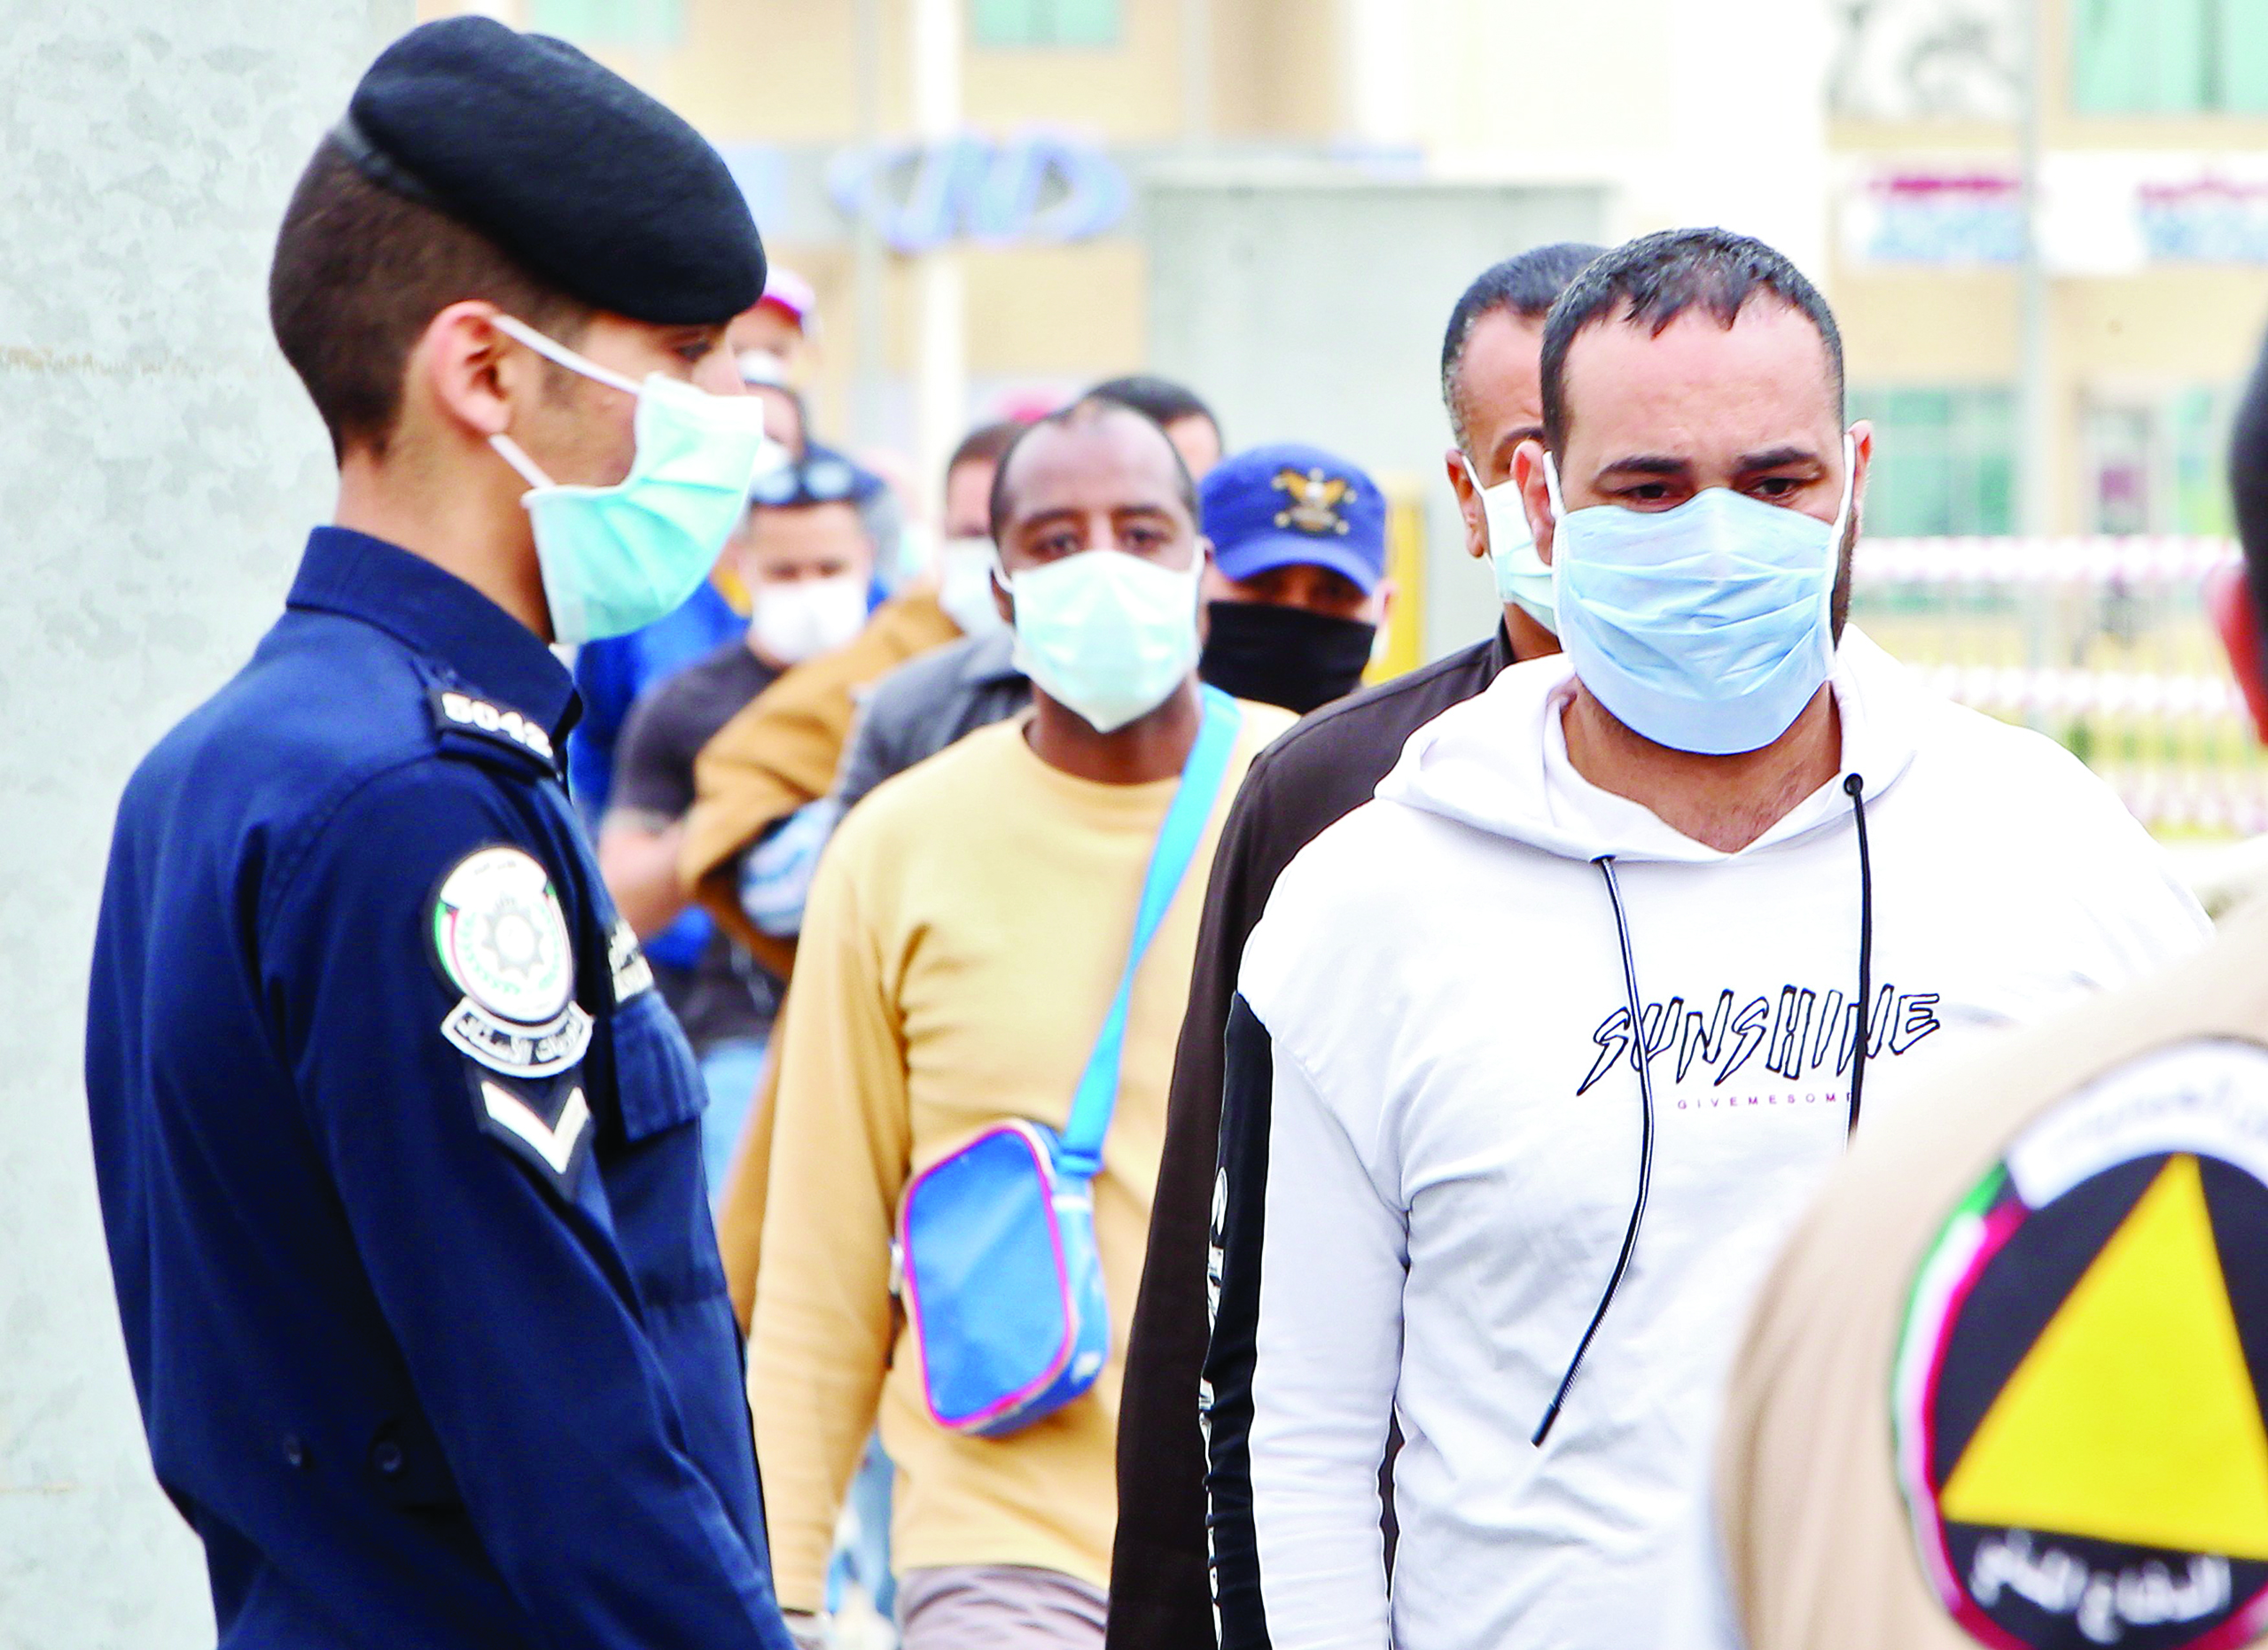 Expatriate workers returning from Egypt, Syria, and Lebanon arrive at a Kuwaiti health ministry containment and screening zone for COVID-19 coronavirus disease in Kuwait City on March 15, 2020. (Photo by YASSER AL-ZAYYAT / AFP)